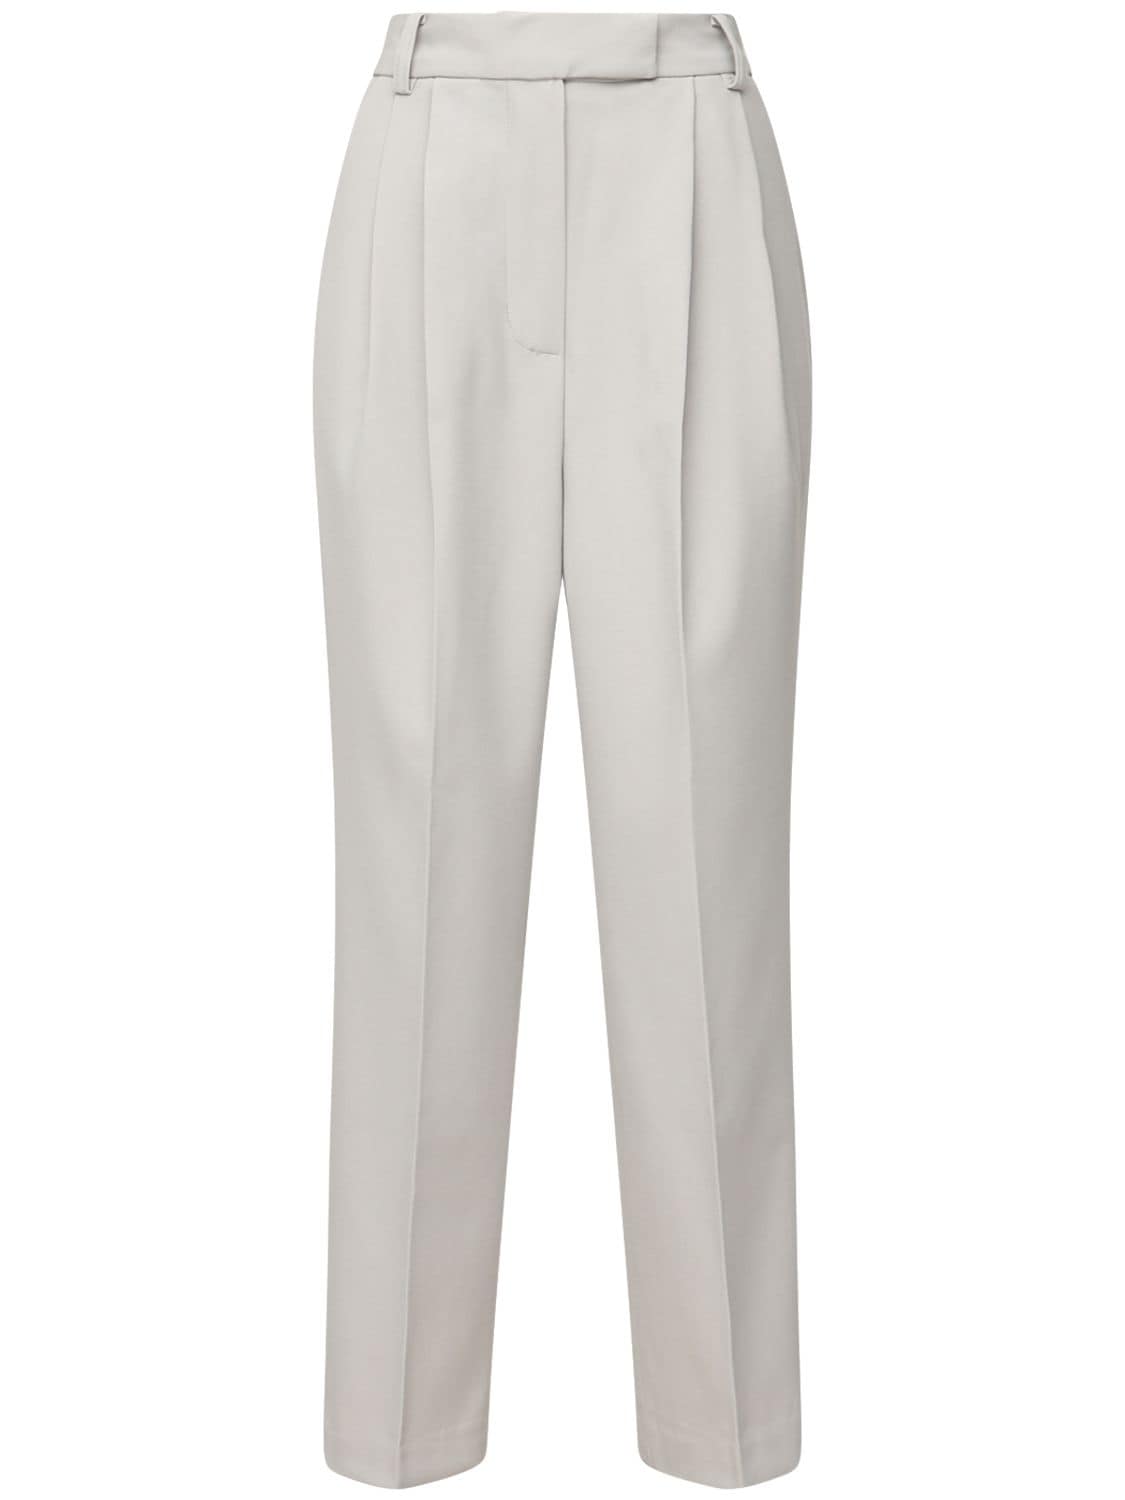 The Frankie Shop Bea Twill Straight Pants In Grey